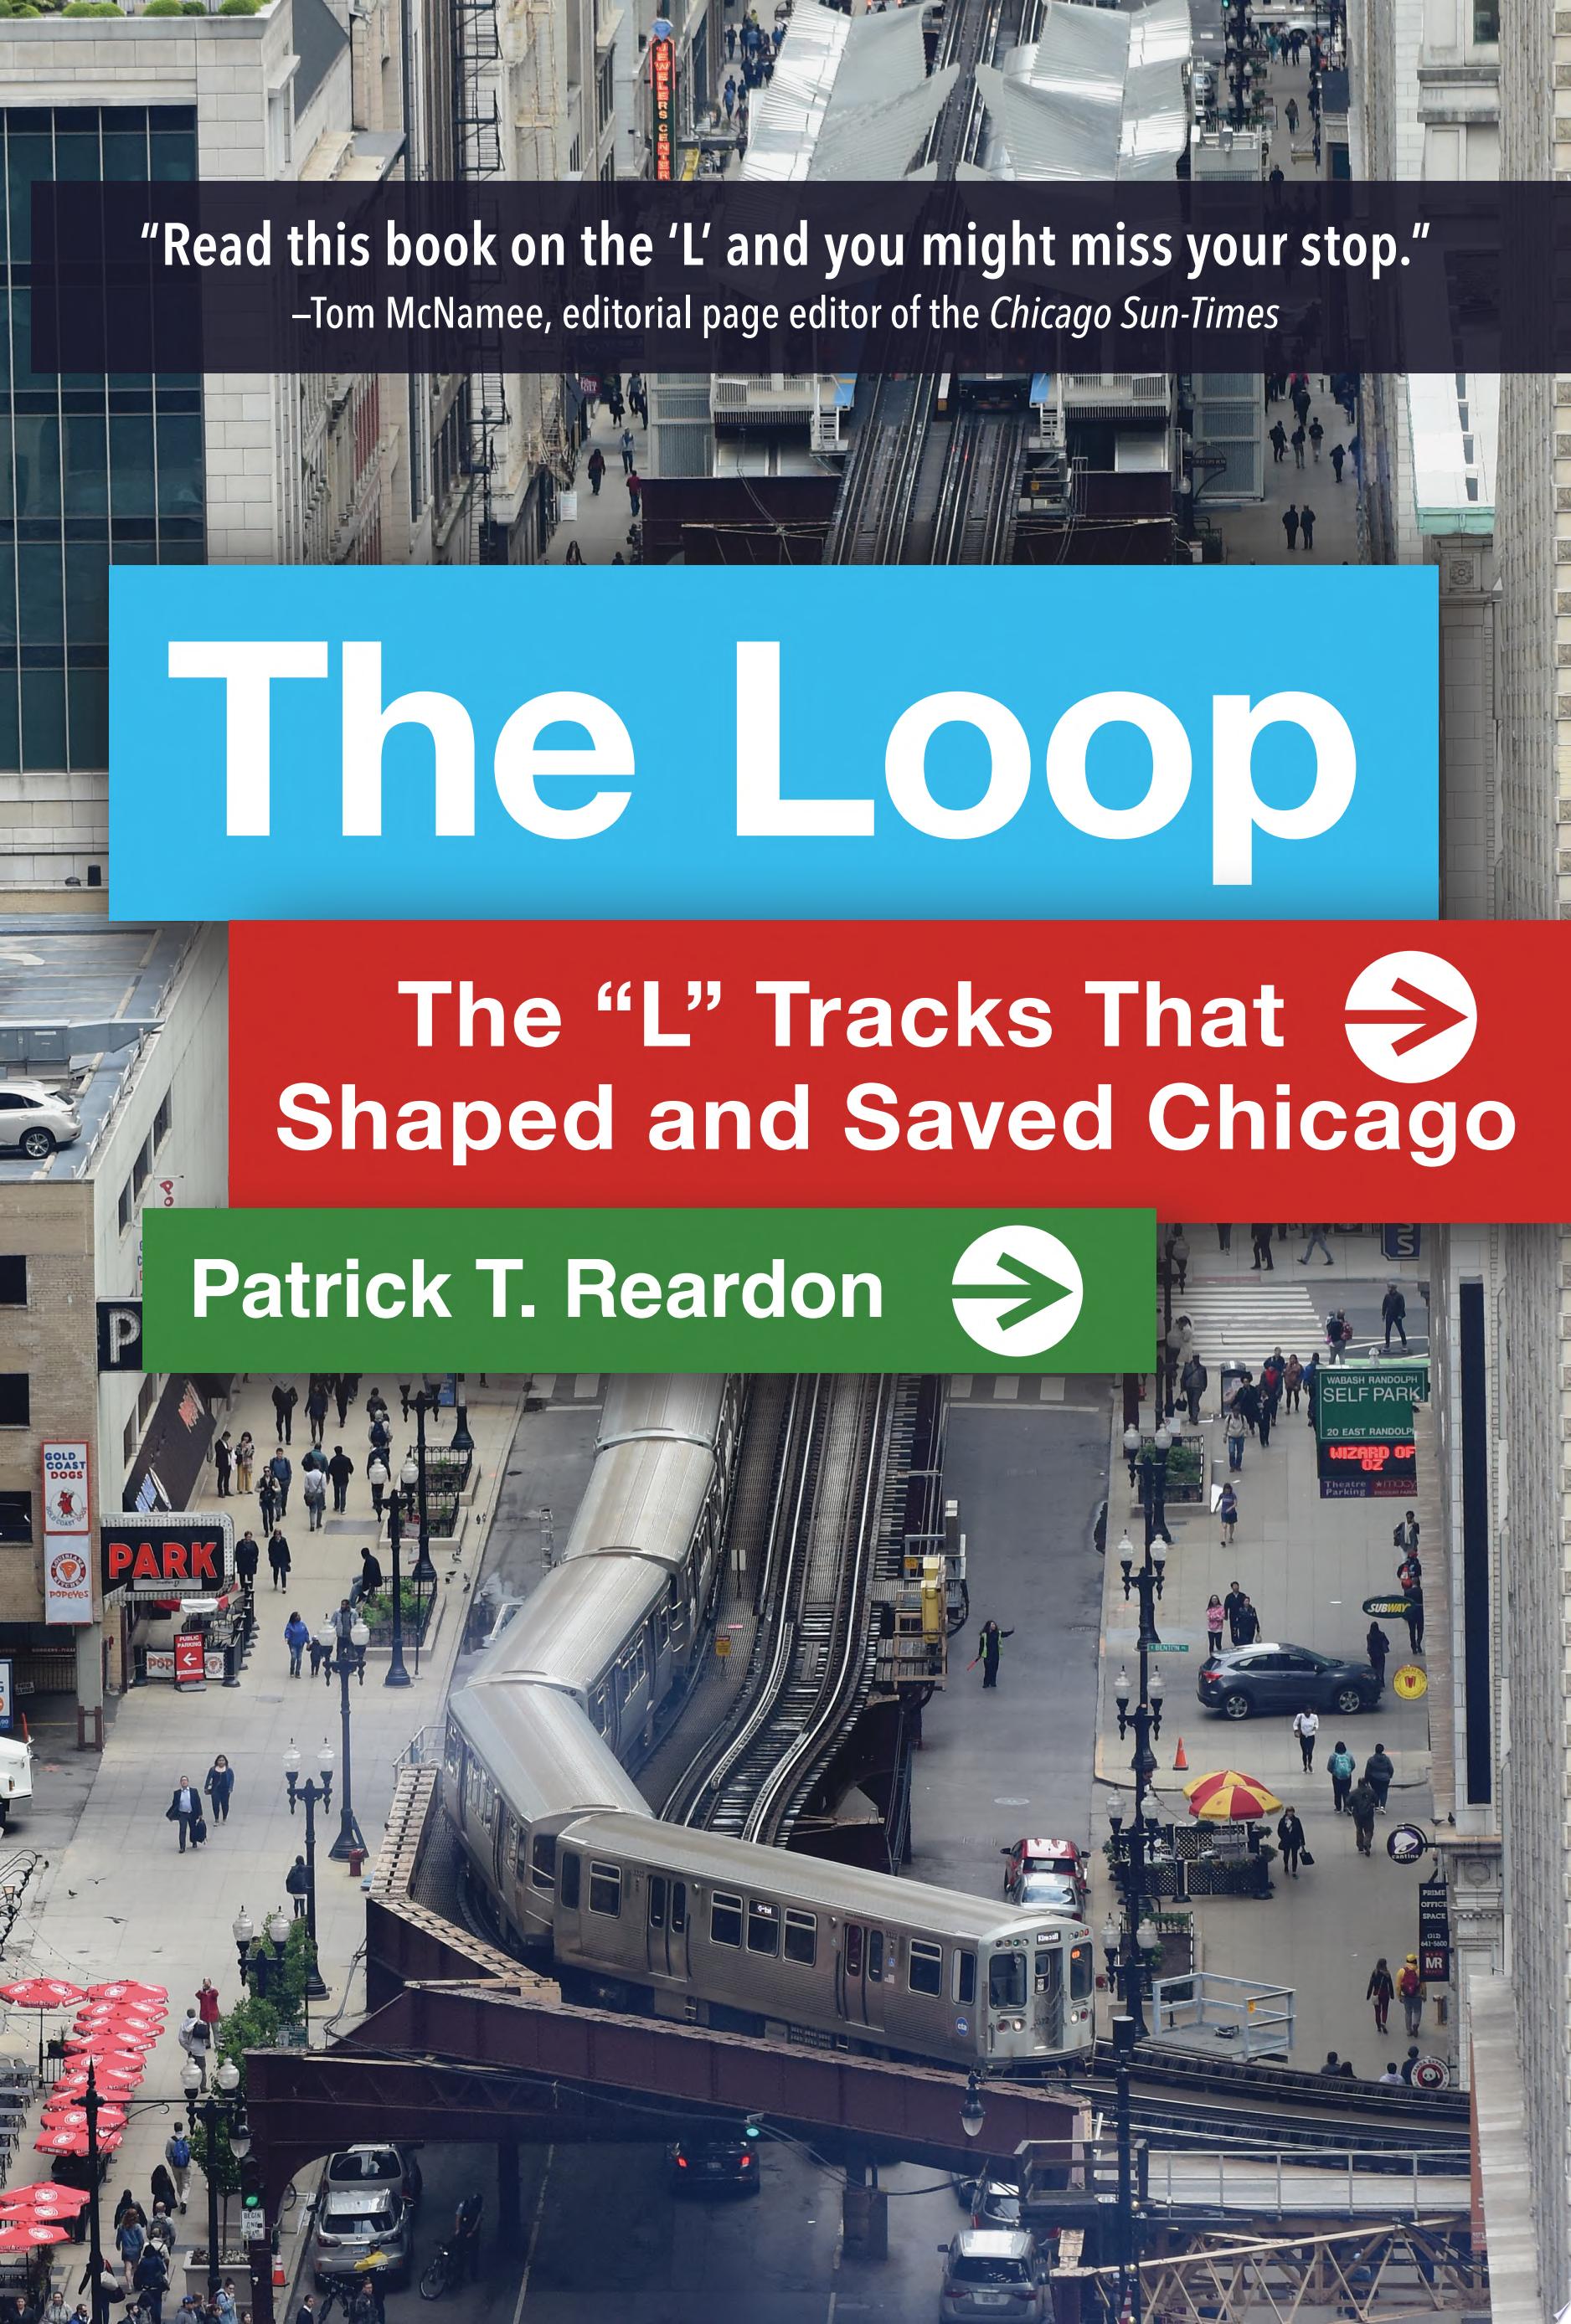 Image for "The Loop"